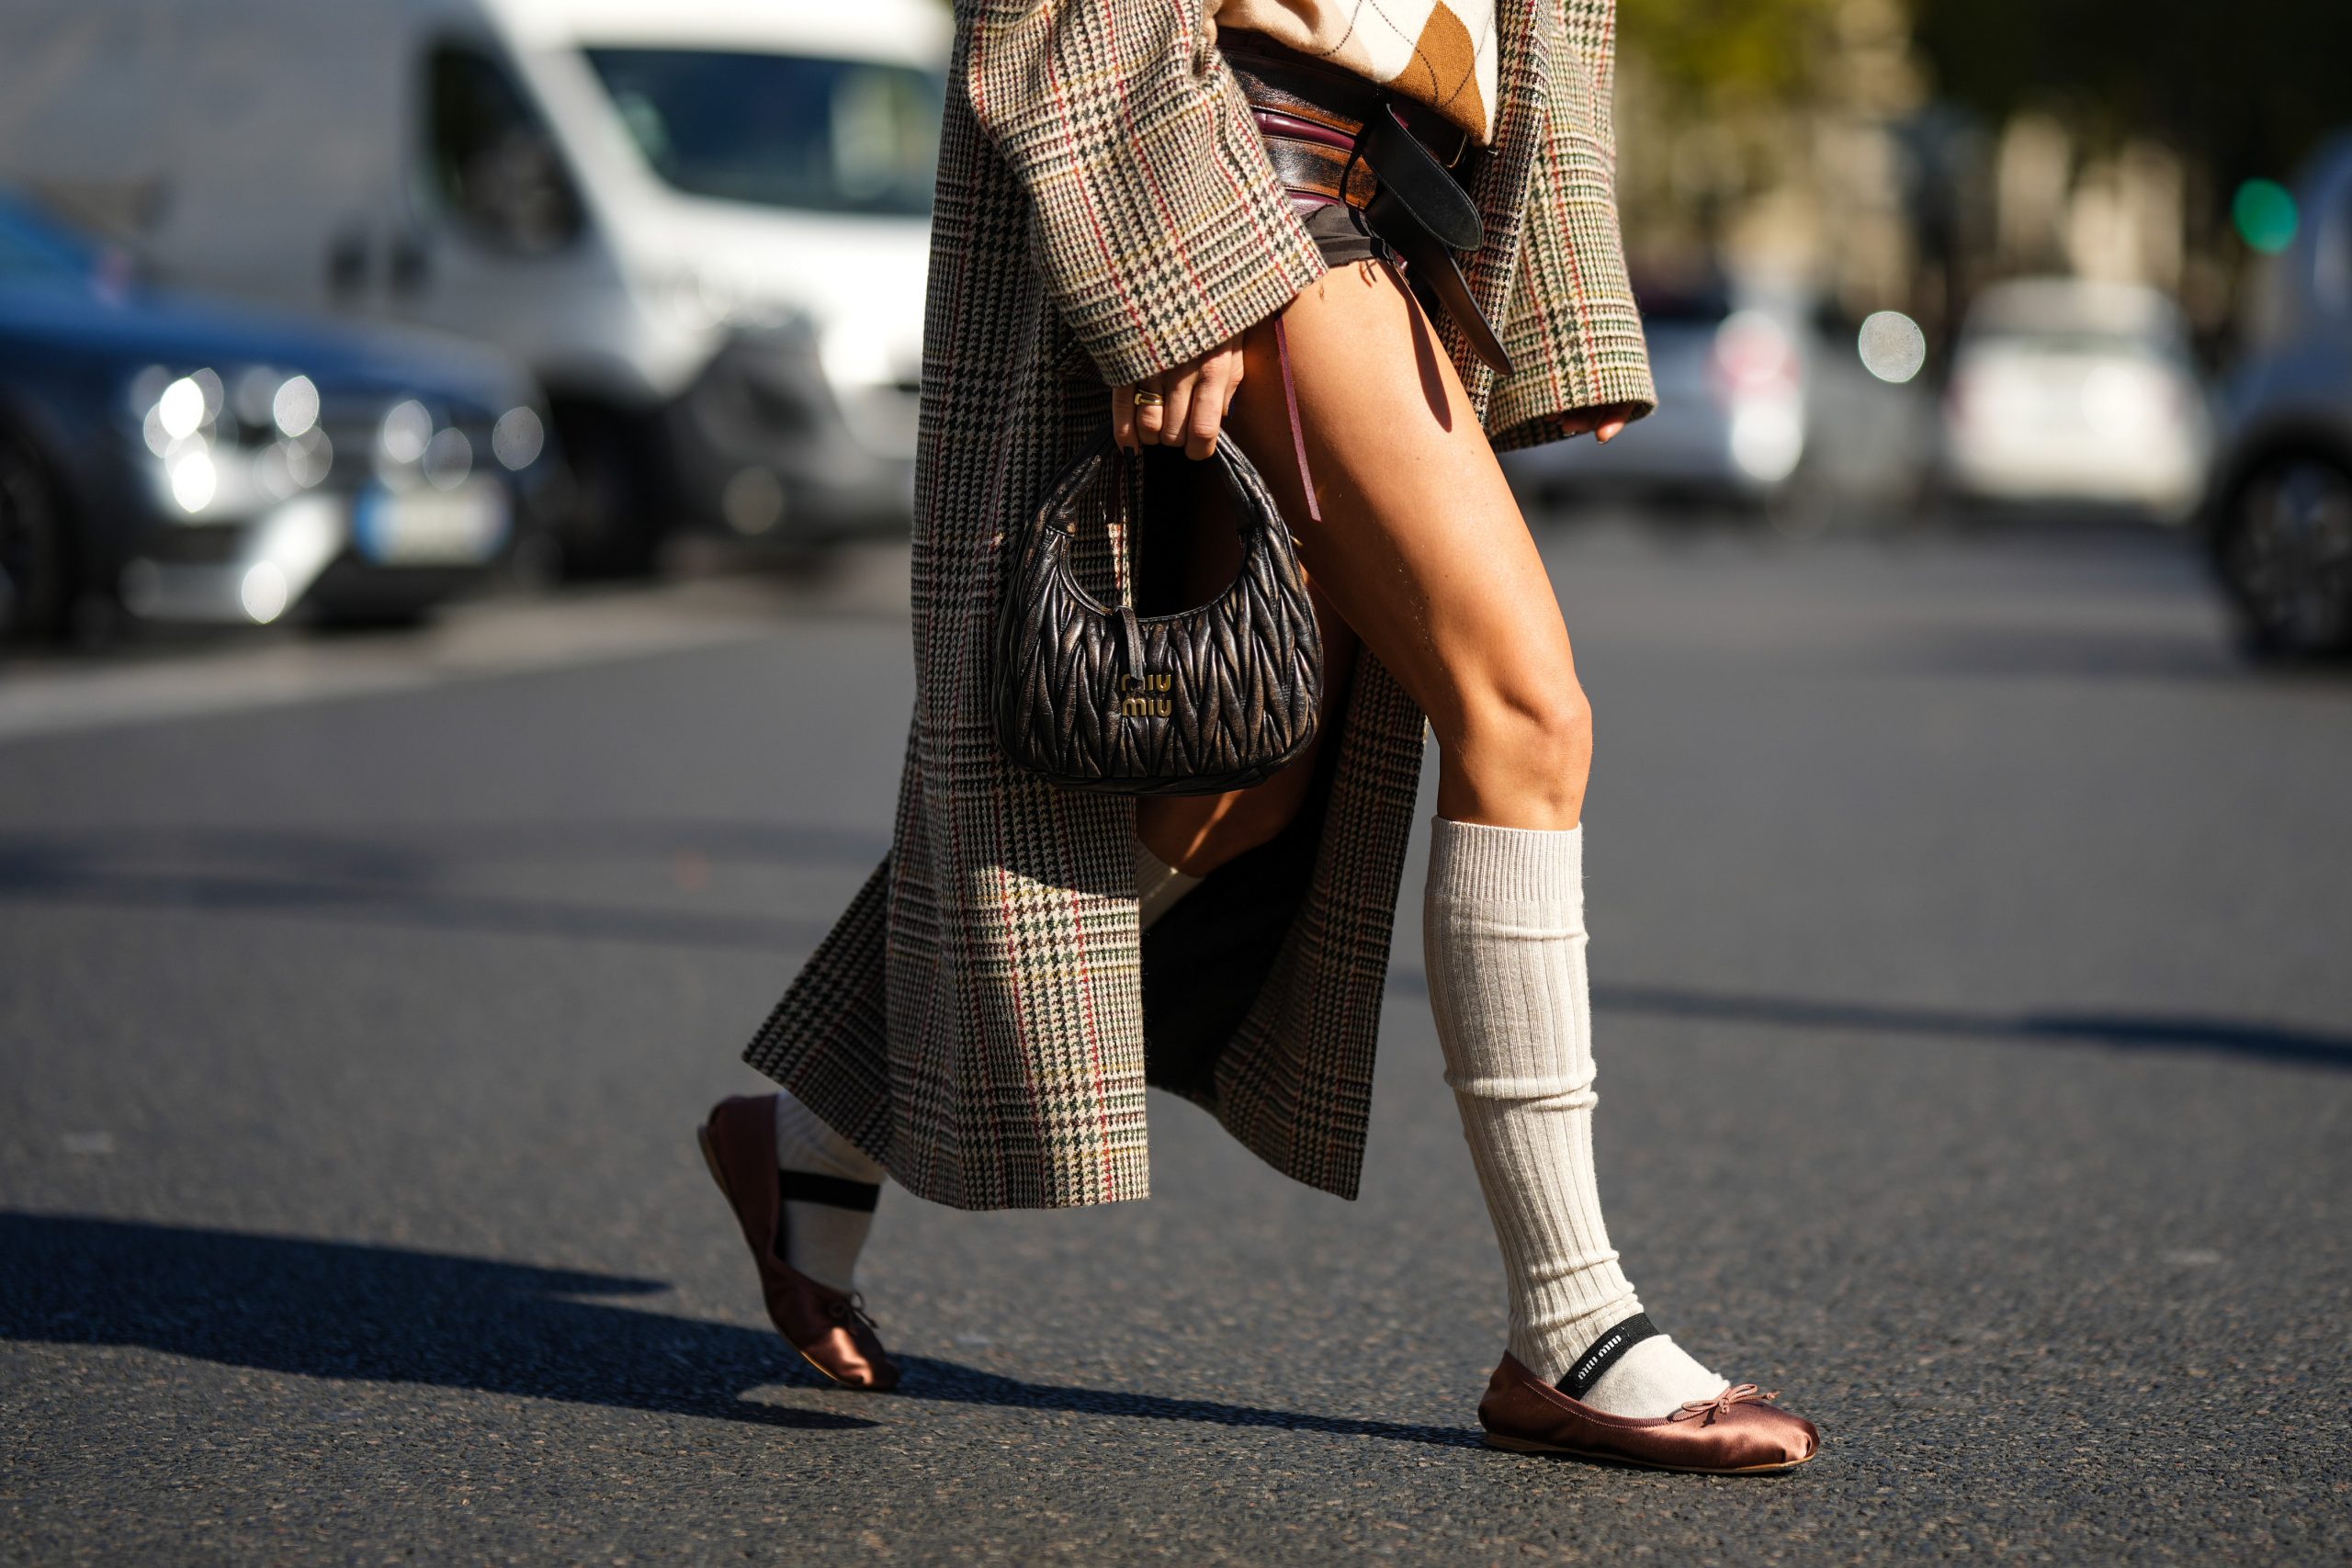 The ballet pump is staging a comeback in fashion – how do we feel